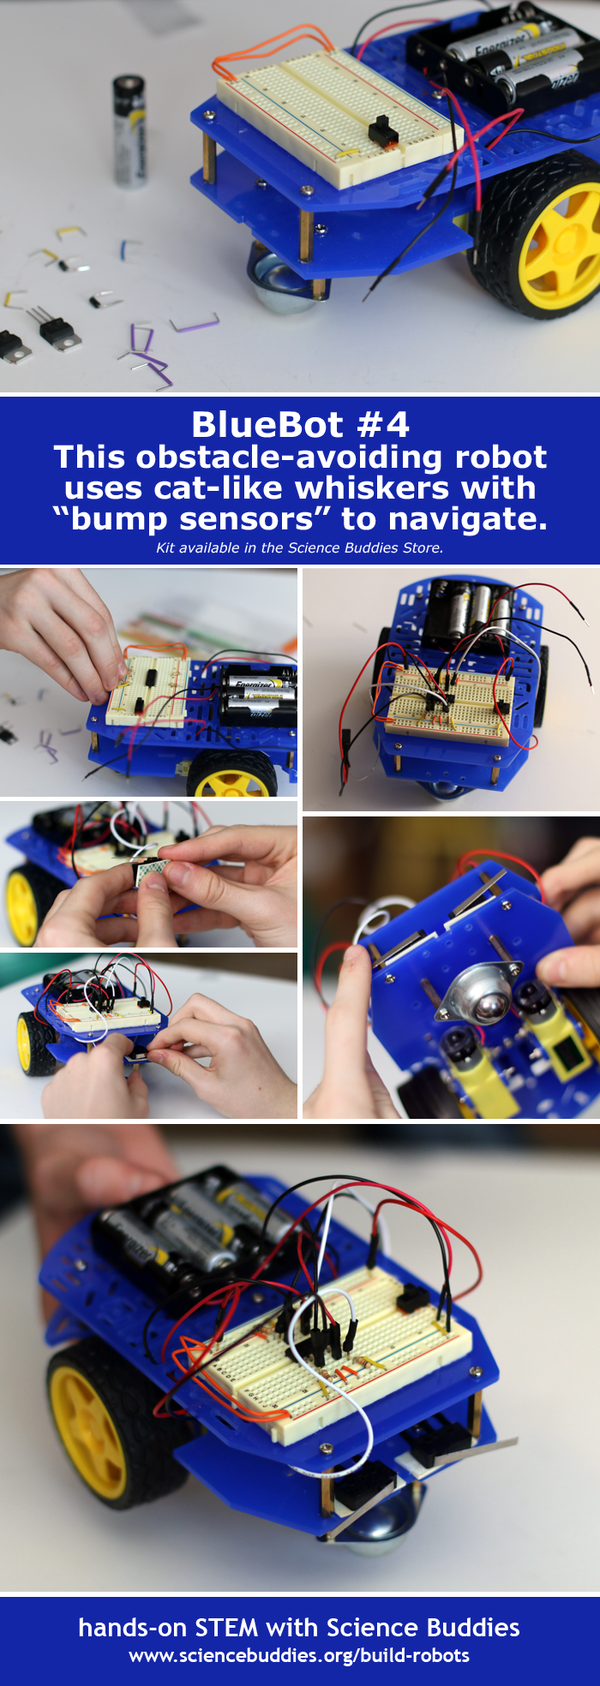 BlueBot #4 - the Obstacle-Avoiding BlueBot, part of the series of robotics projects that can be done with the BlueBot: 4-in-1 Robotics Kit